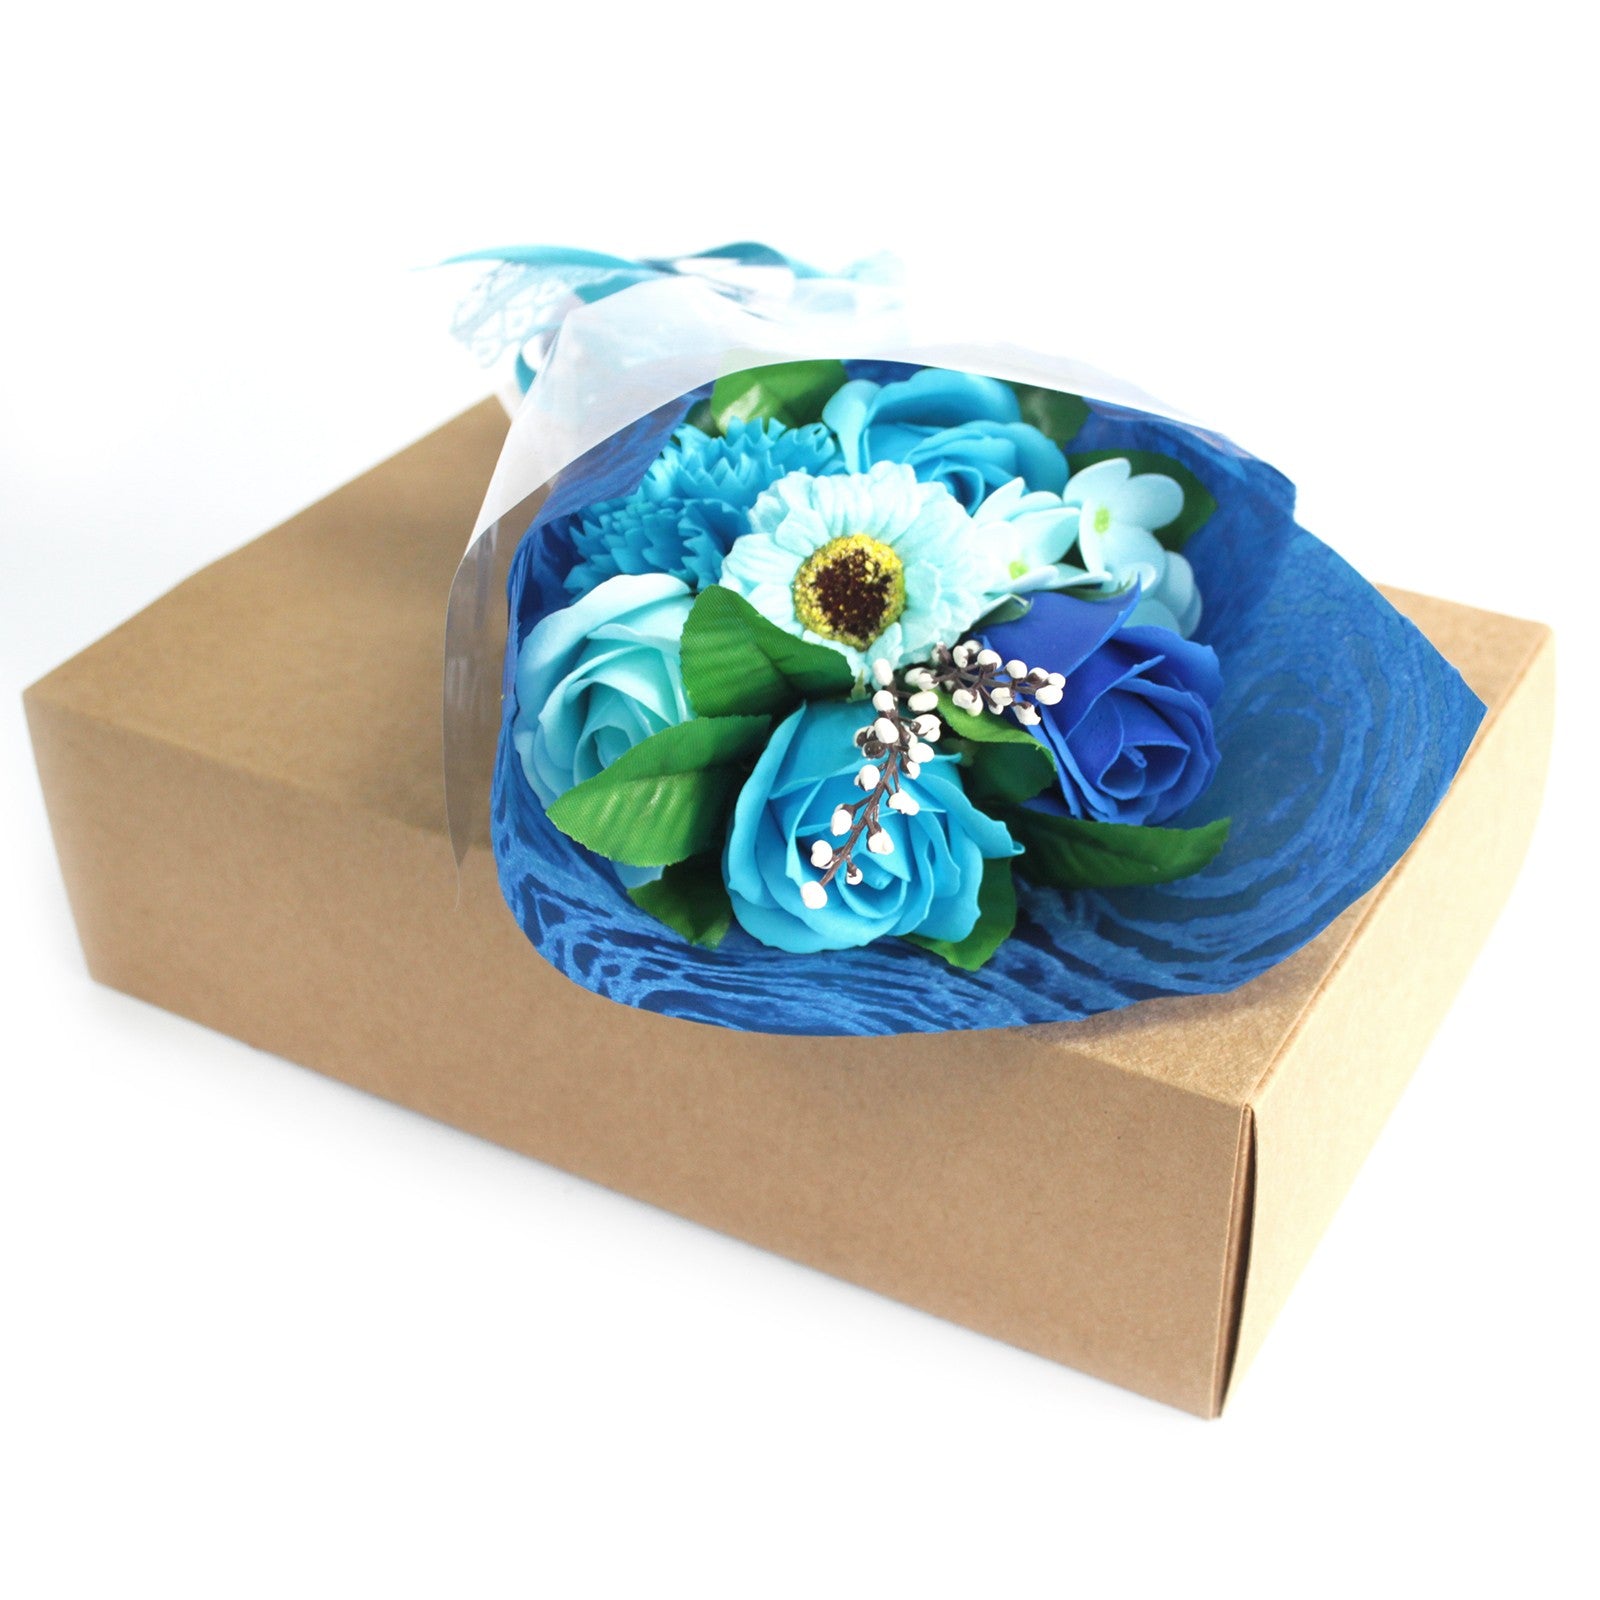 soap flowers bouquet blue rose & daisy boxed handcrafted luxury bath gift Eco-friendly SLS-free paraben-free and silicone-free these scented moisturising soap flowers bring elegance visual appeal and a refreshing aroma Ideal for personal care routines hand washing bathing